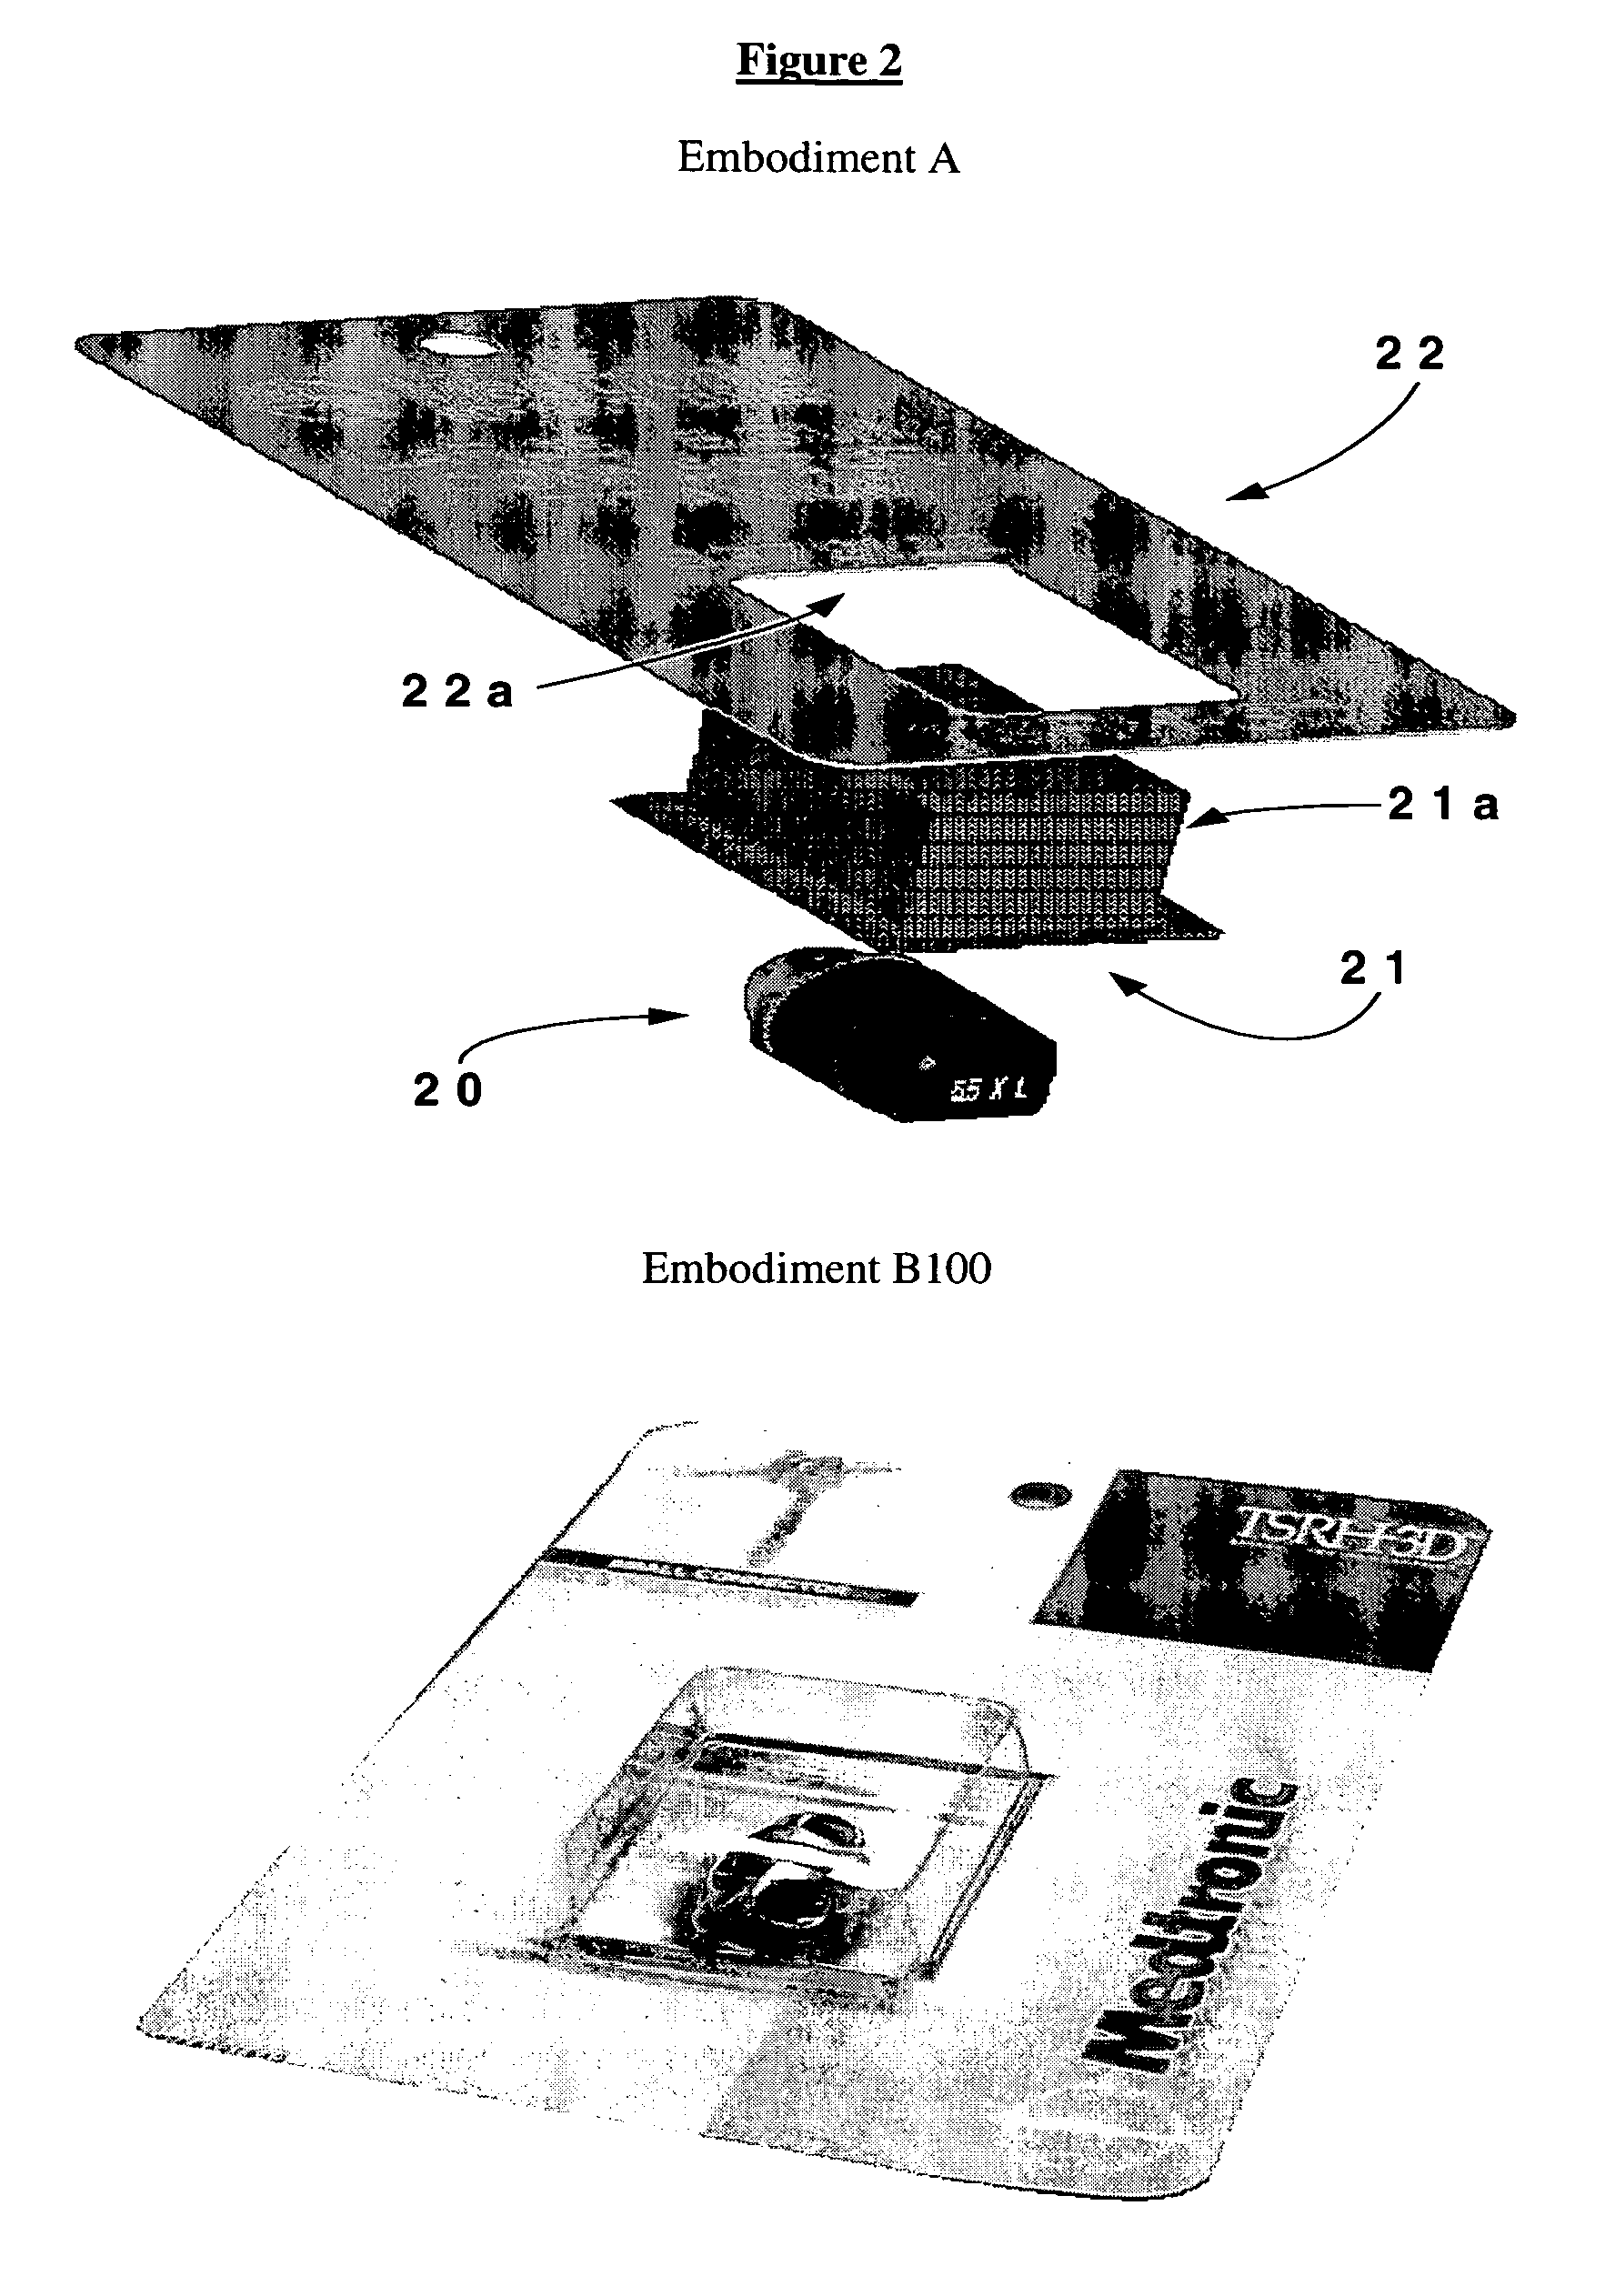 Packaging system for medical devices